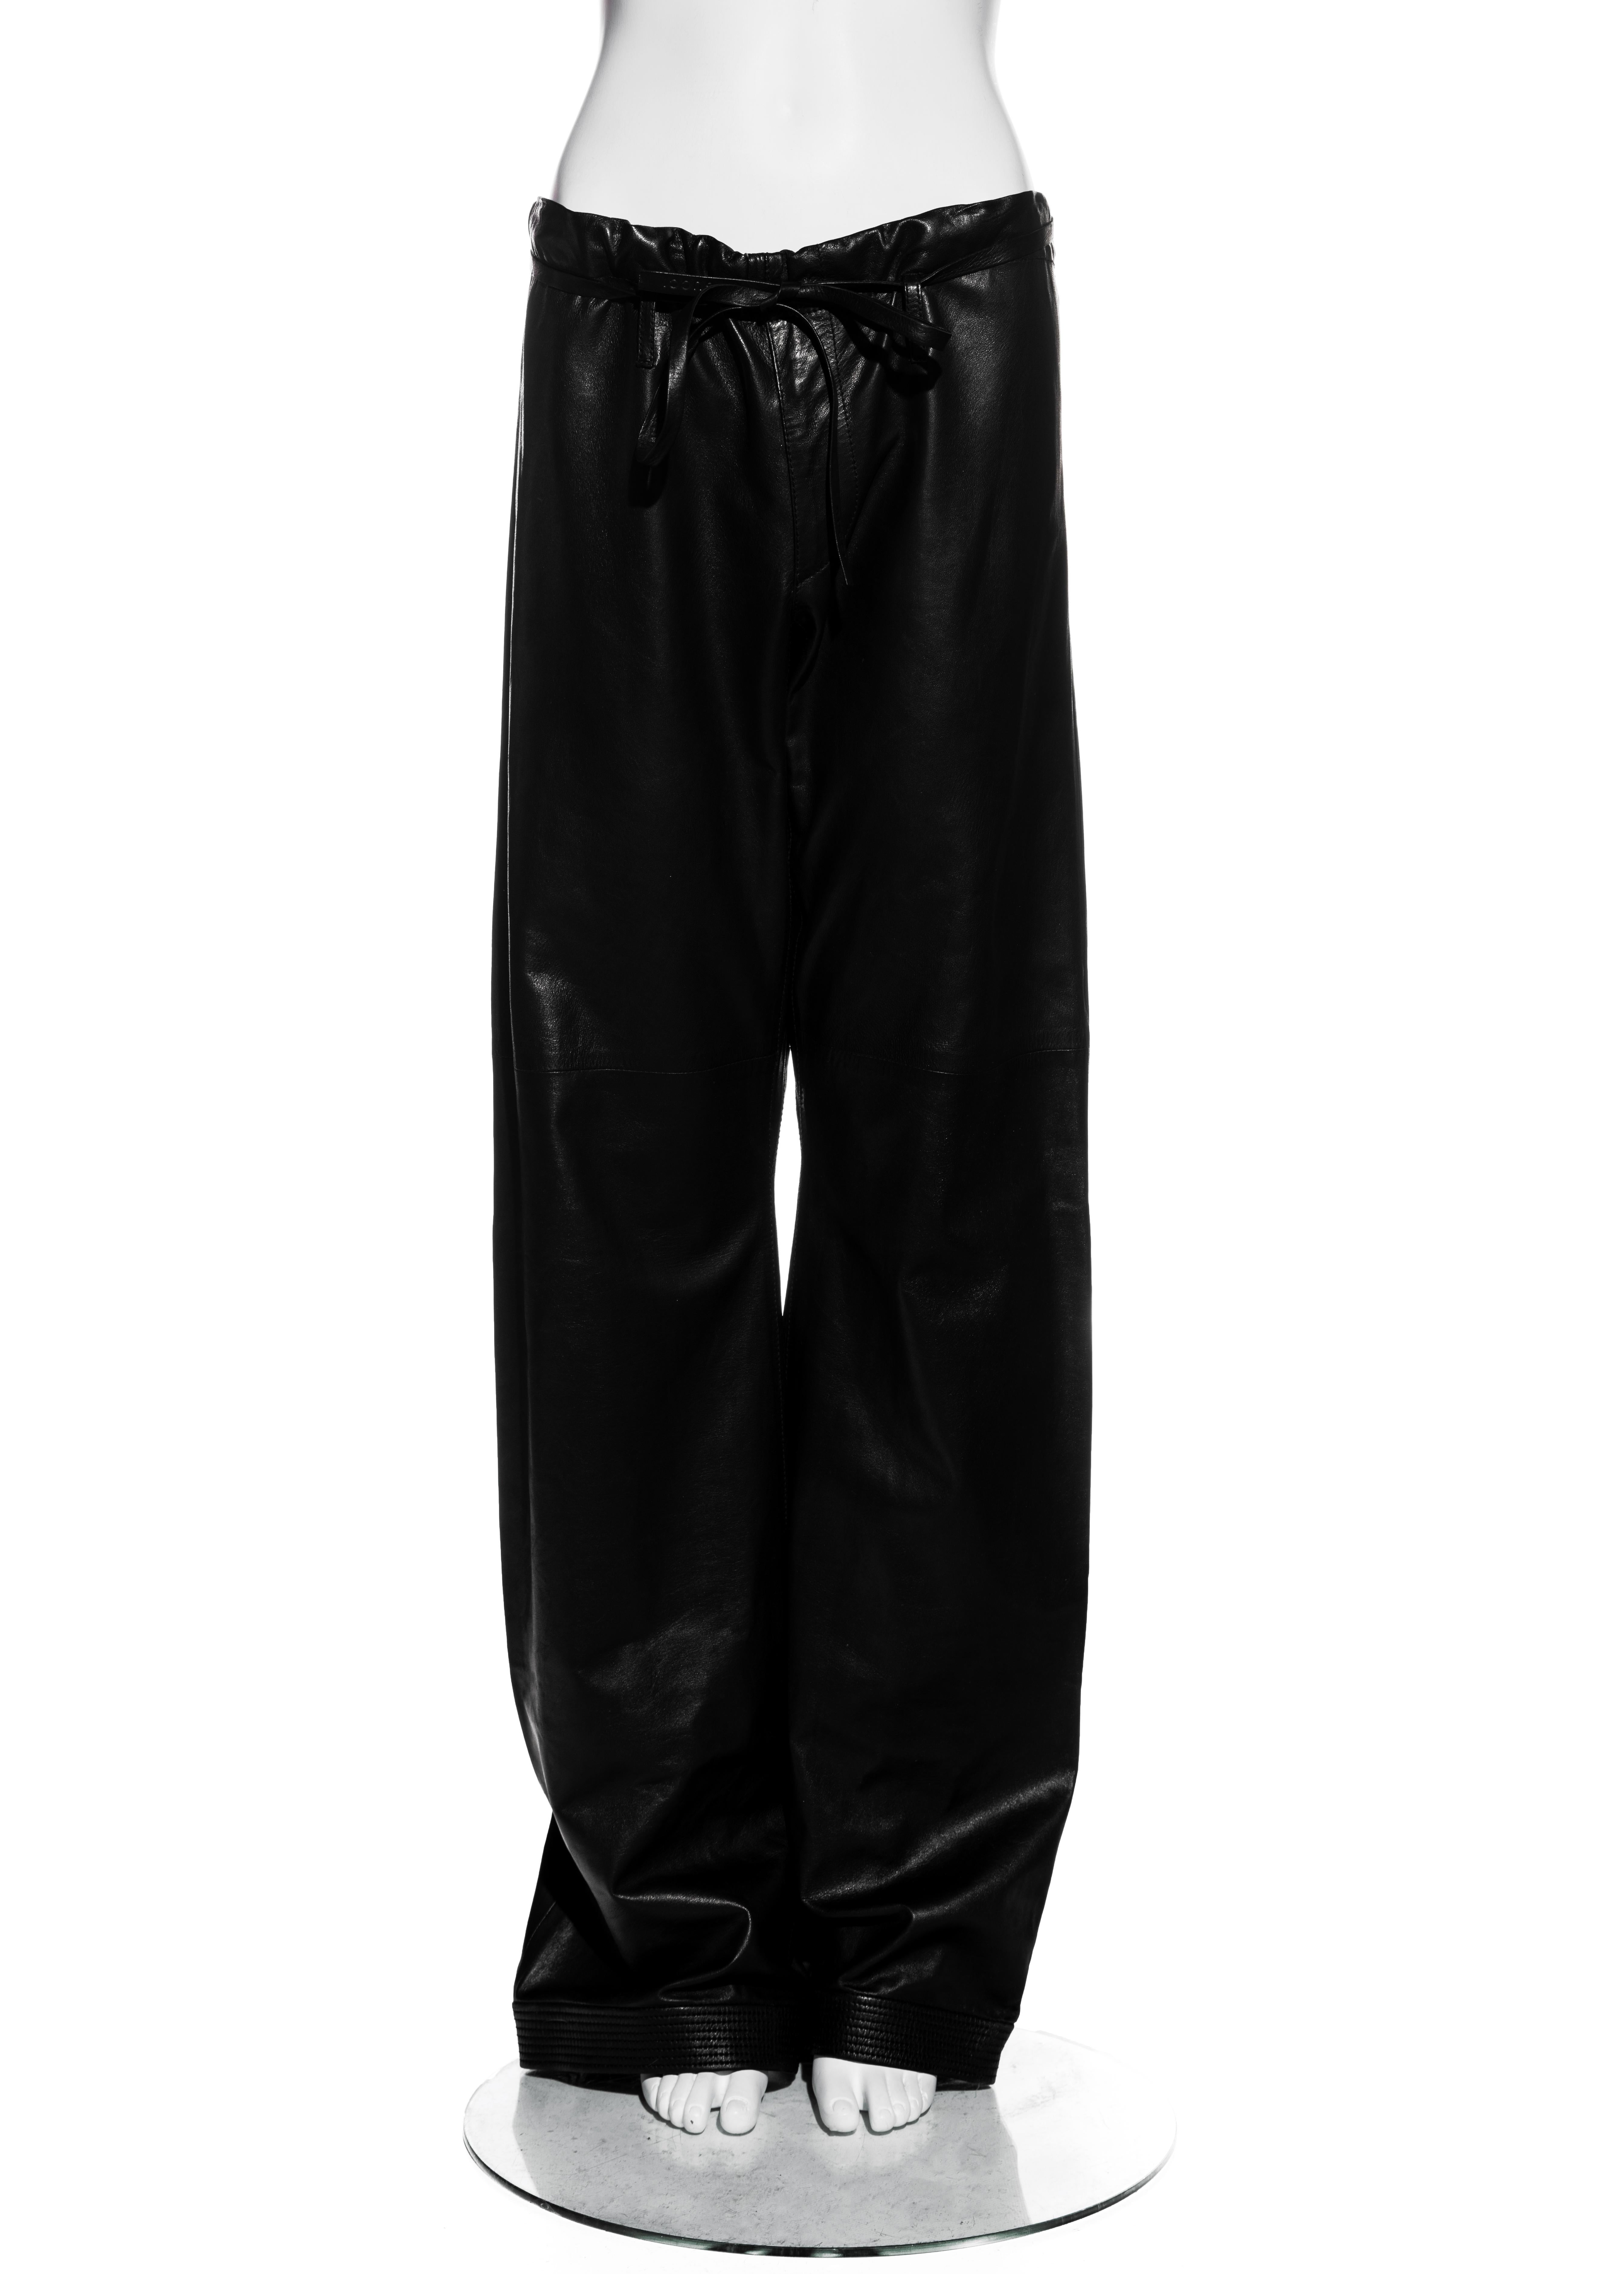 ▪ Gucci unisex black lambskin leather pants 
▪ Designed by Tom Ford
▪ Leather drawstring fastening at waist 
▪ Slits at both sides of waist
▪ Stitching detail at hem
▪ Wide leg 
▪ Mens Size 46 (would fit bigger and smaller sizes)
▪ Spring-Summer 2001